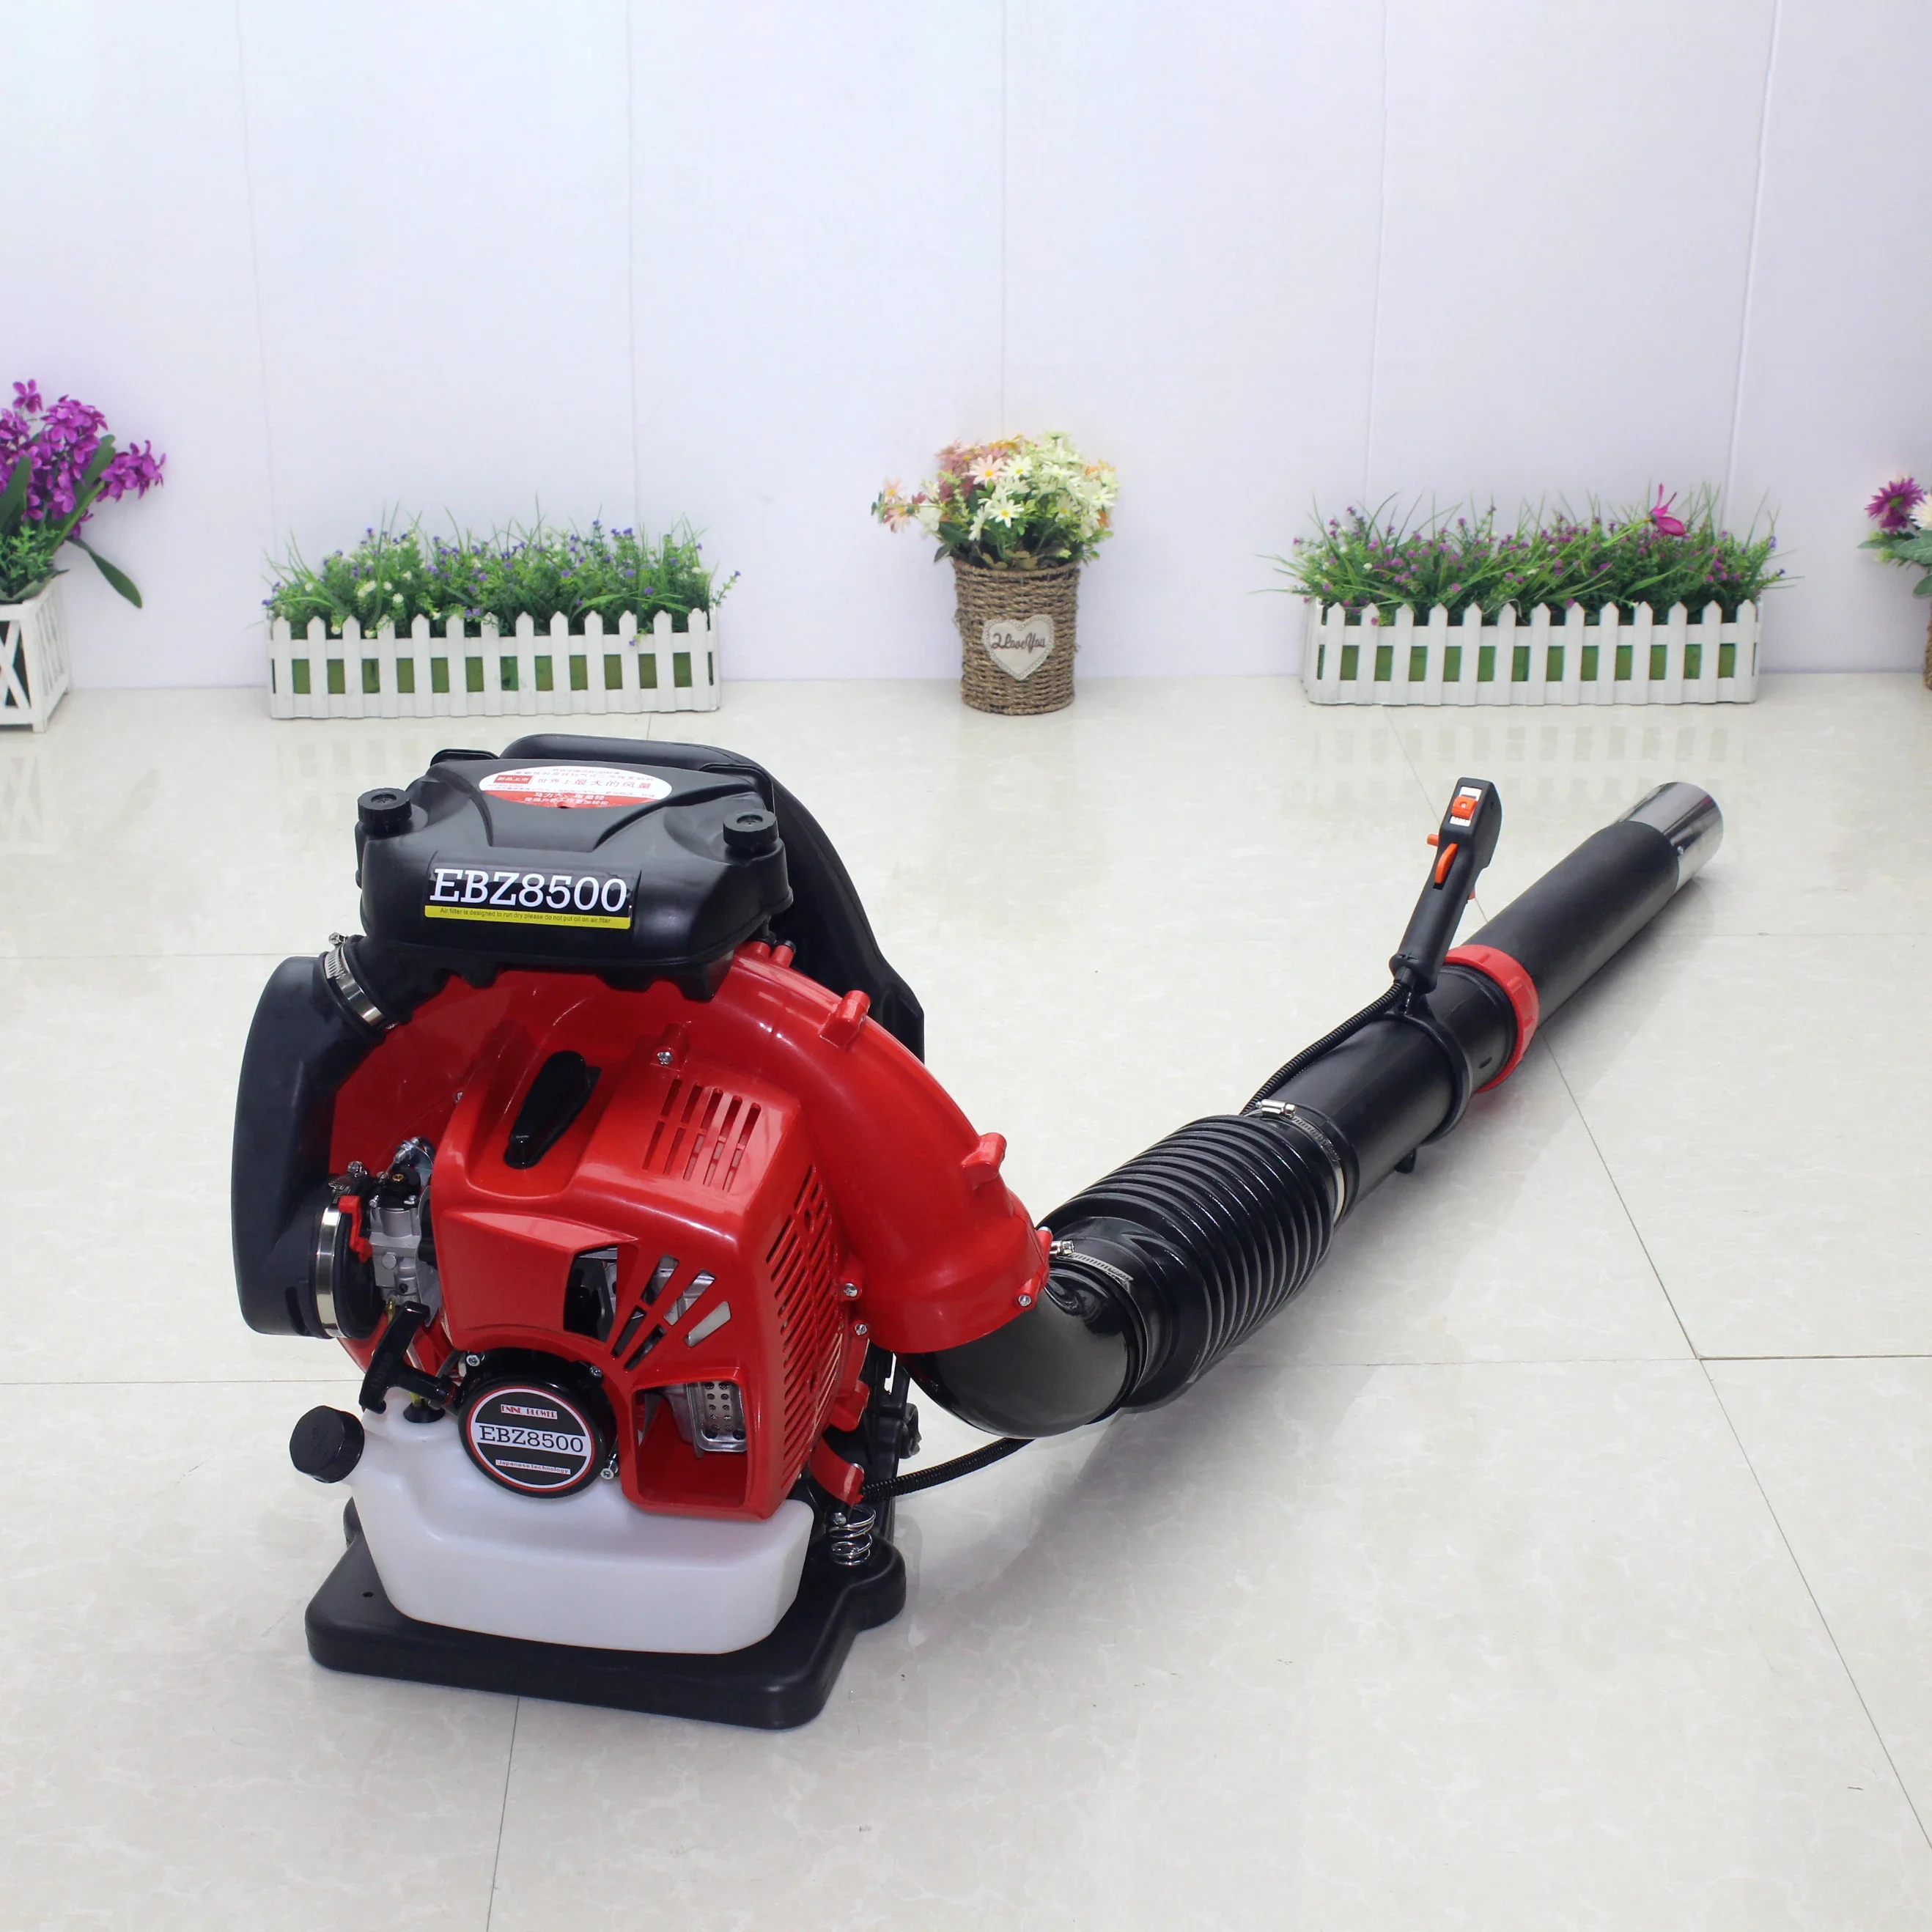 

Garden Air Blower Petrol 75.6cc EBZ8500 Two-Stroke Backpack Leaf Blower Gasoline Snow Blower with Telescopic Air Duct